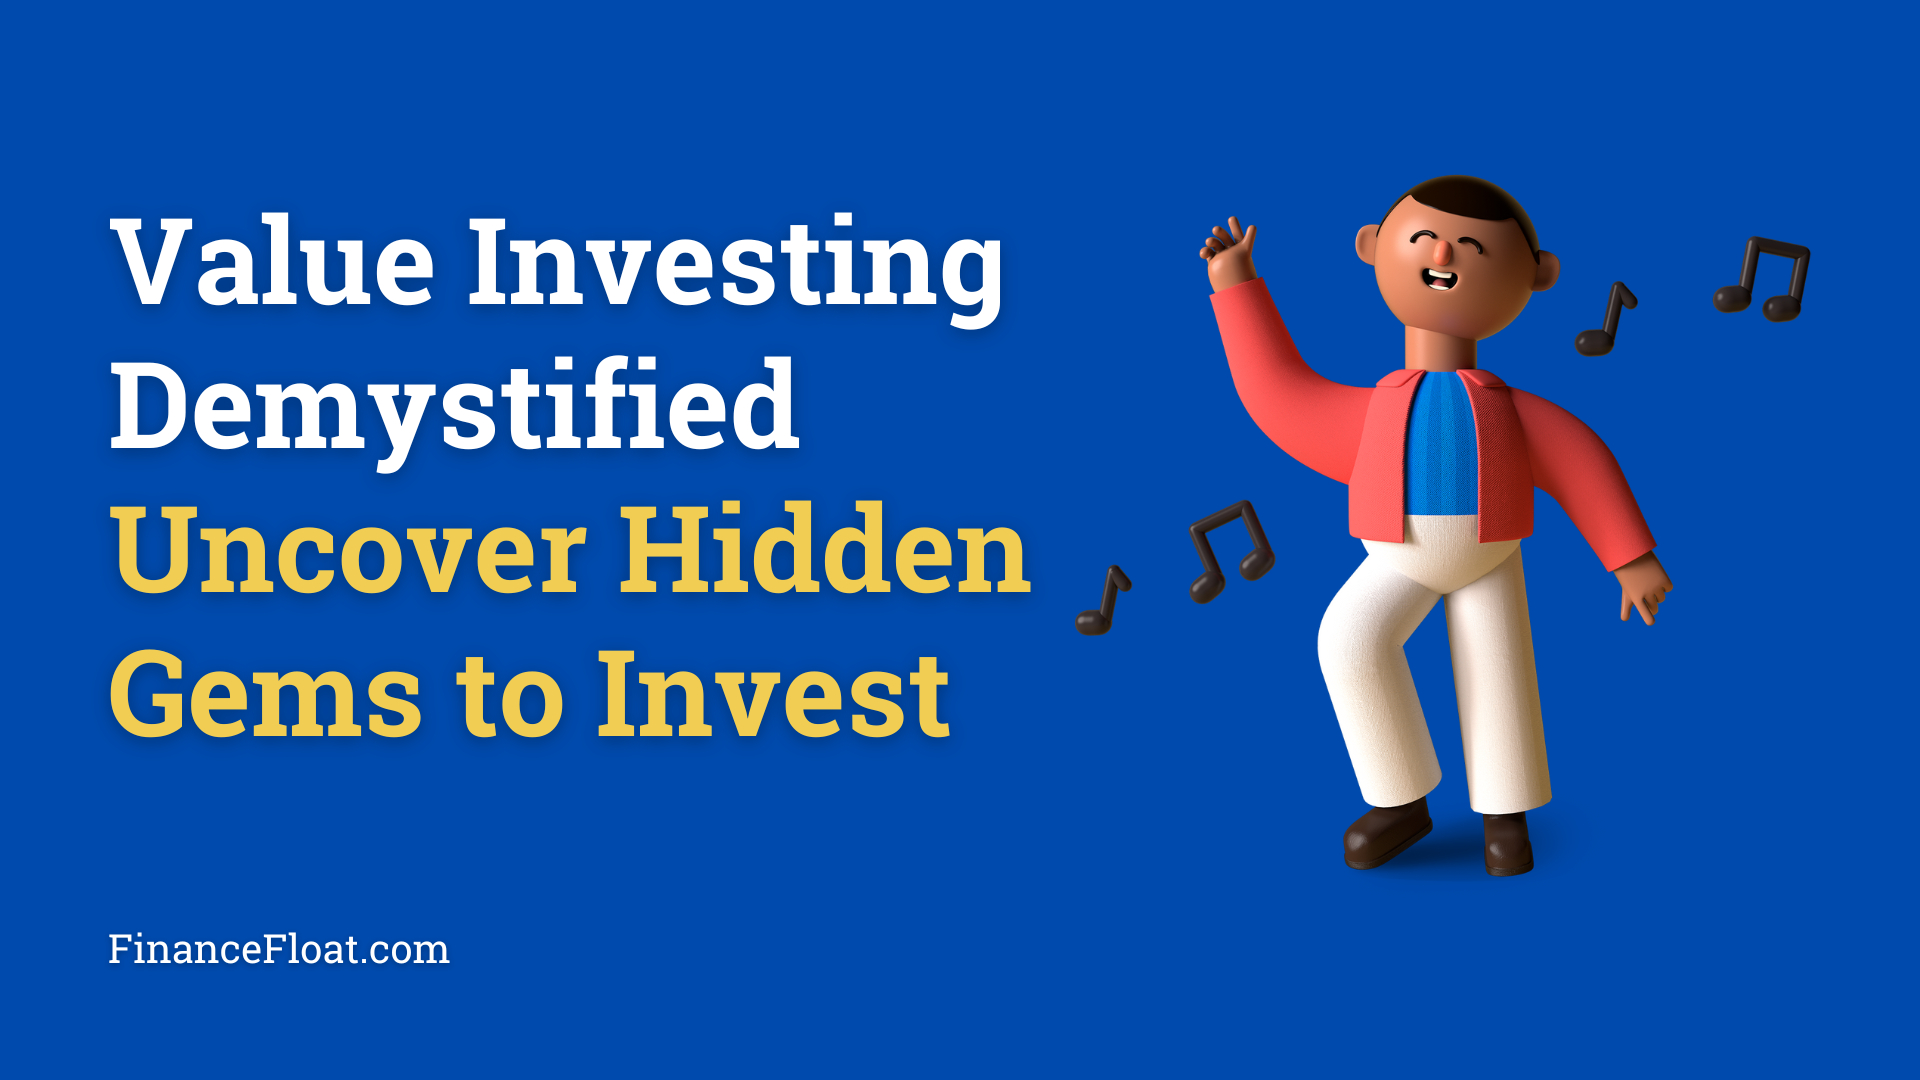 Value Investing Demystified Uncover Hidden Gems to Invest